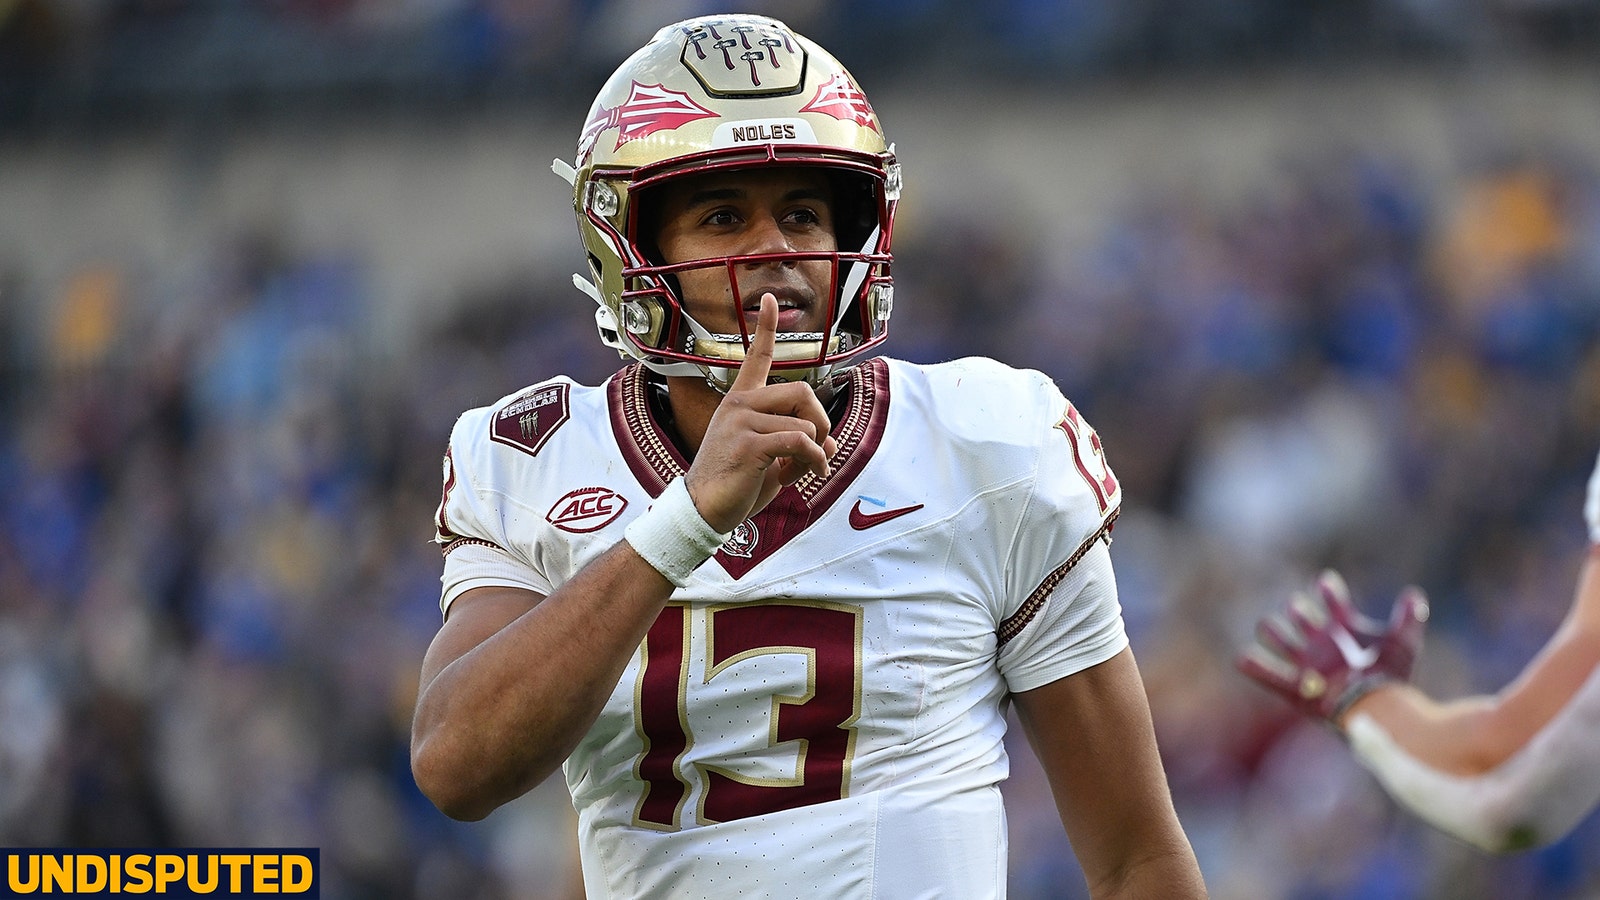 Was Florida State snubbed?